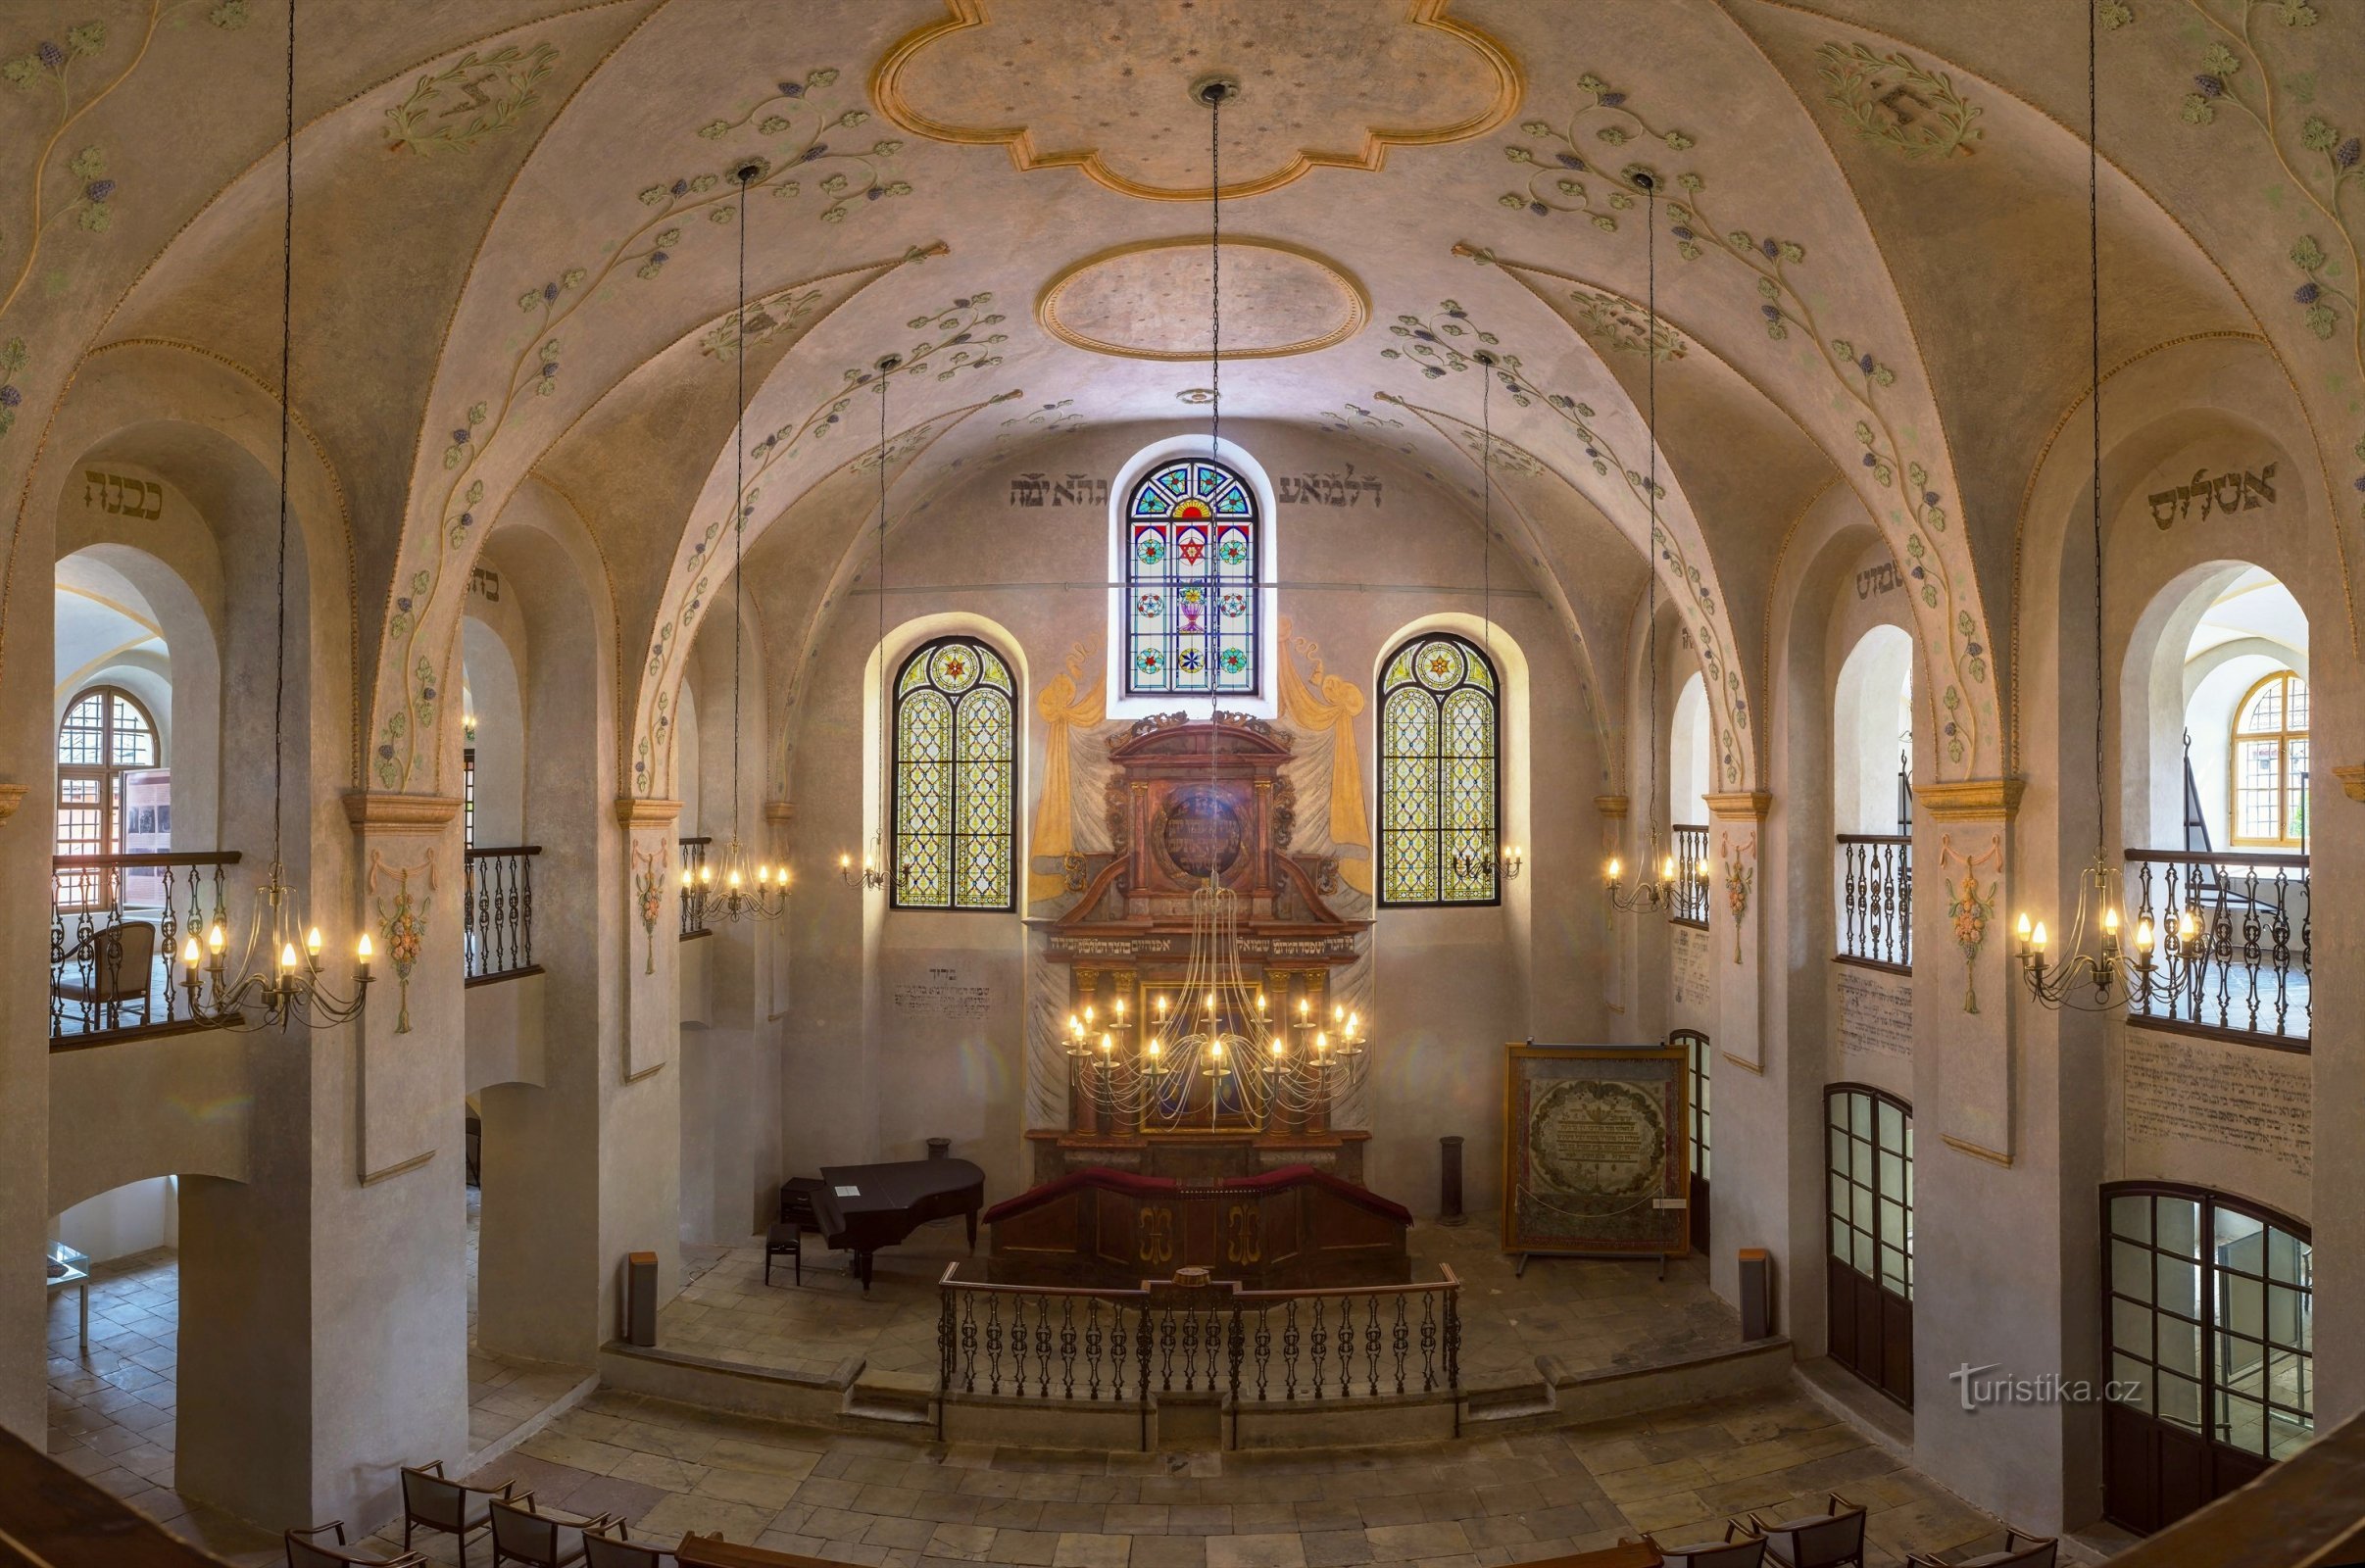 The Cologne Synagogue is celebrating this year